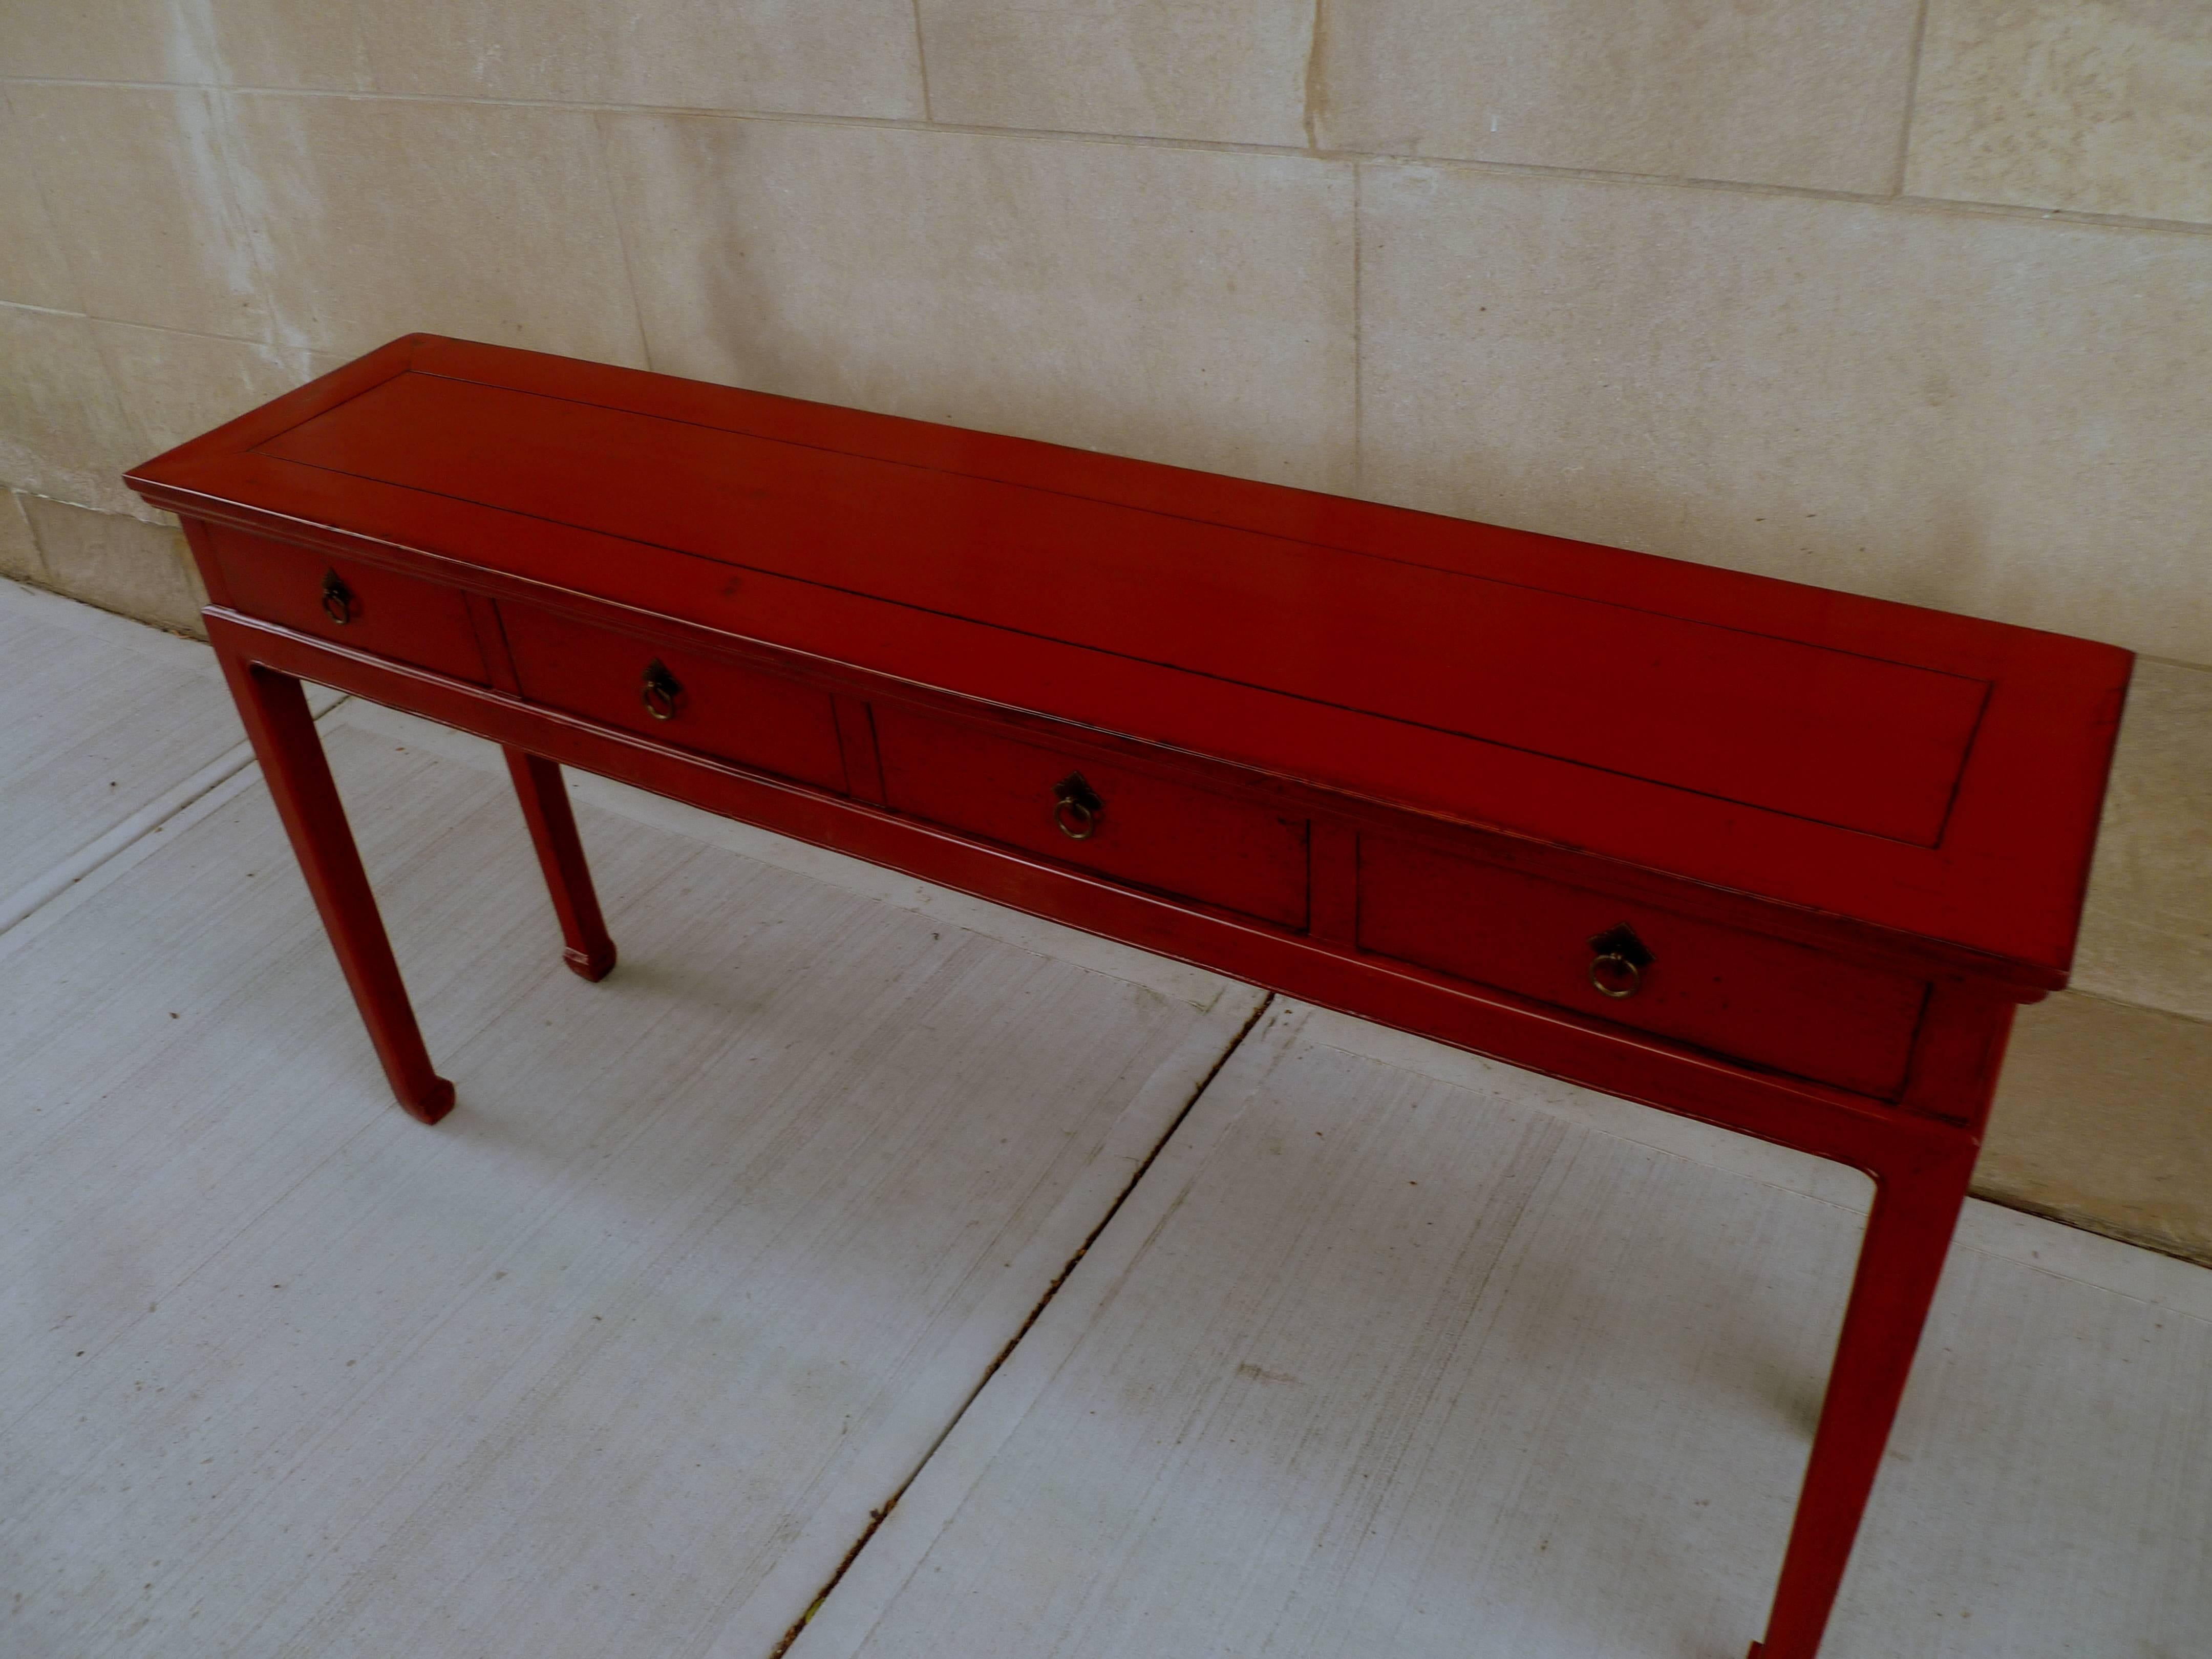 Red Lacquer Console Table with Drawers 1